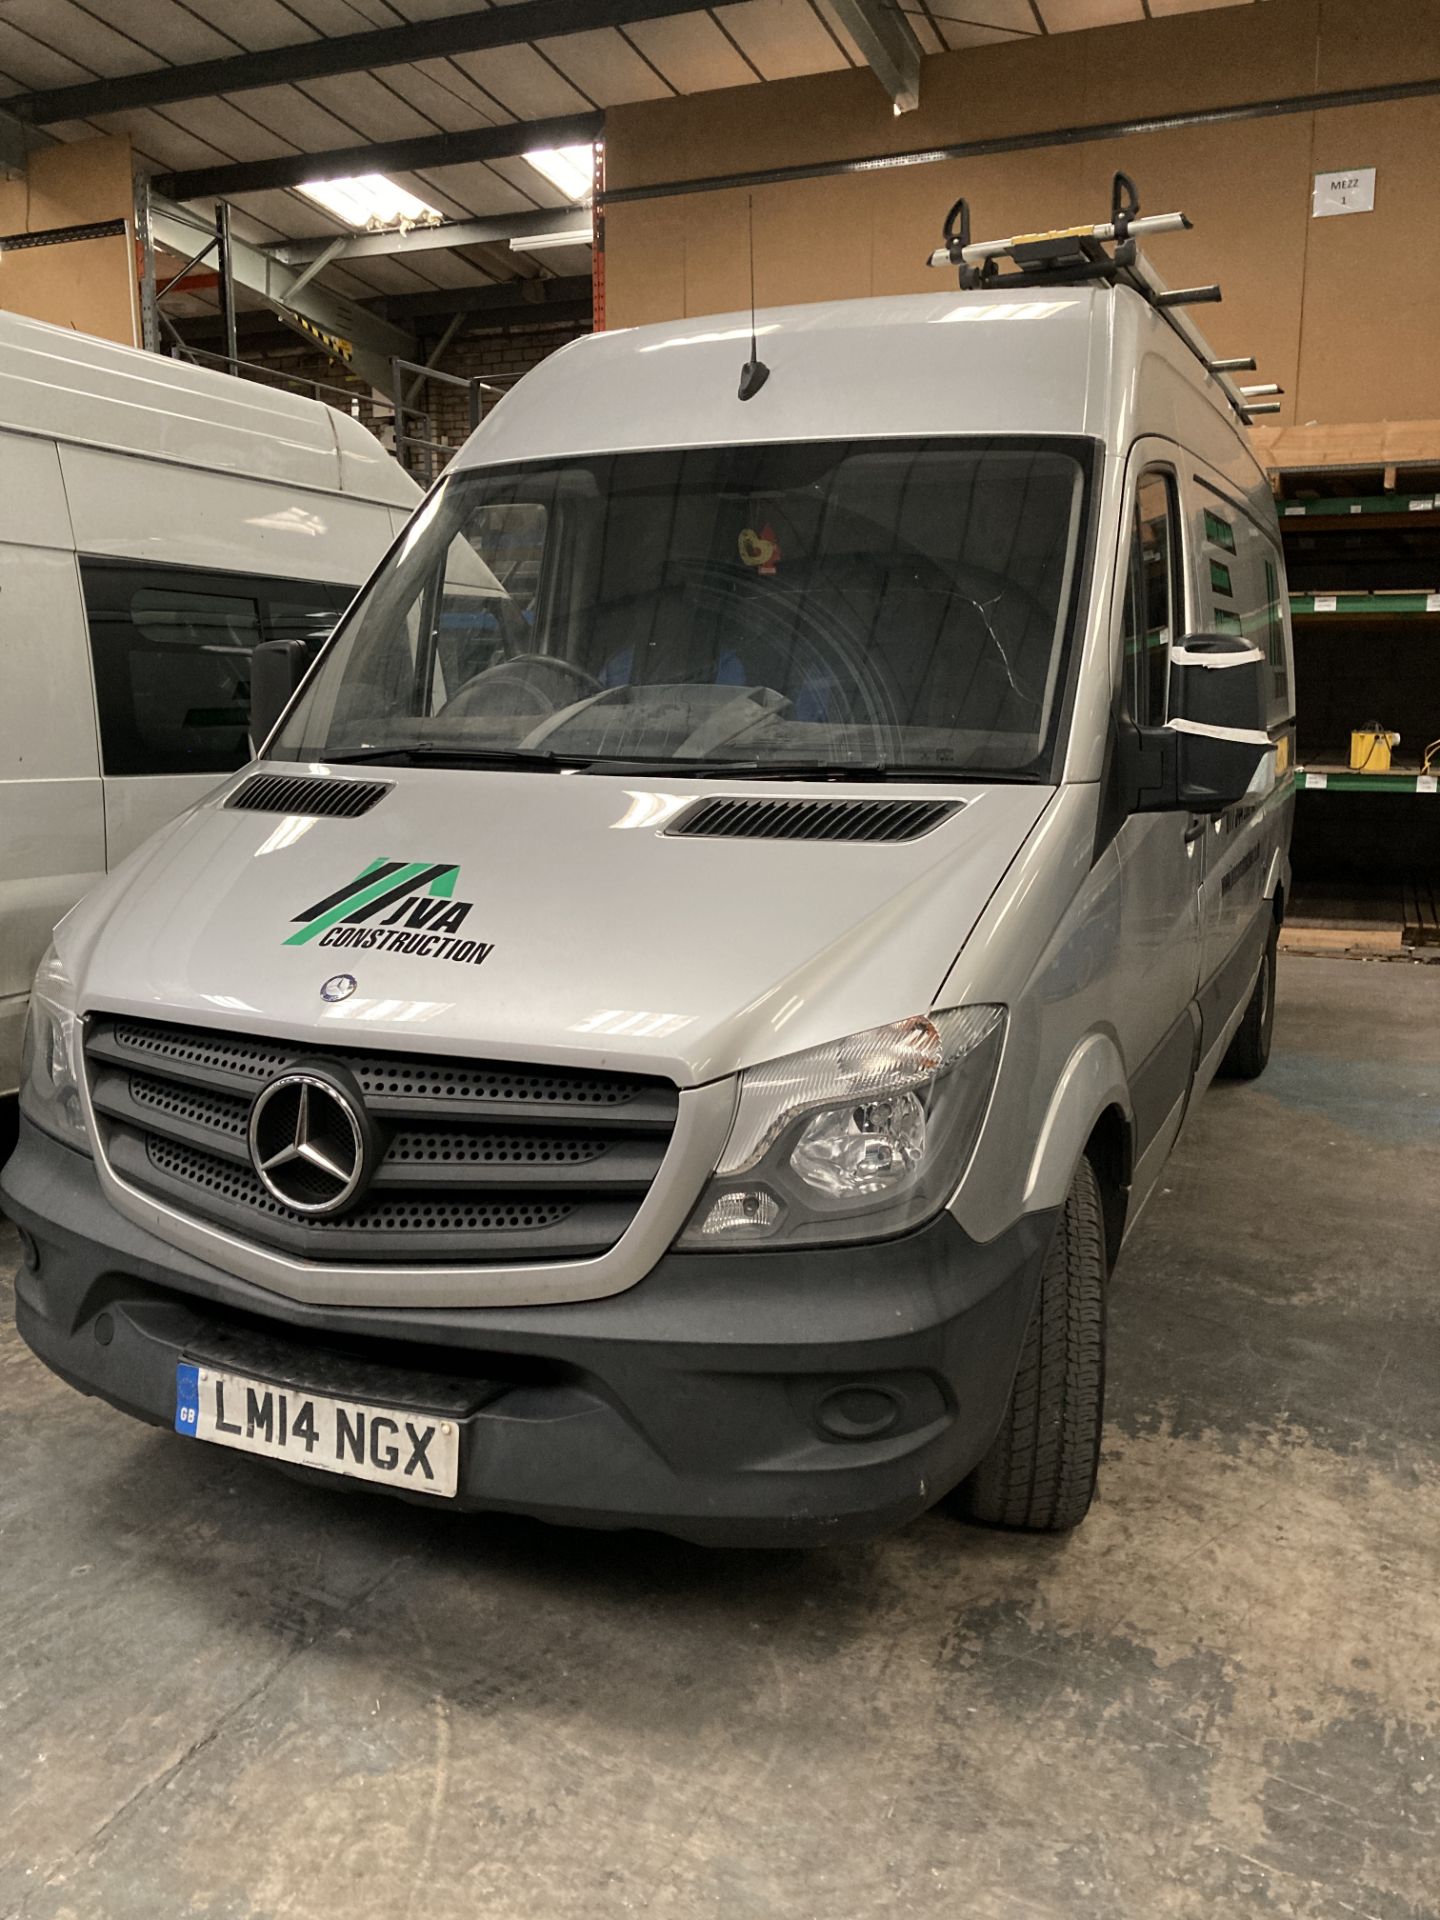 Mercedes Benz Sprinter | 14 Plate | 167,000 Miles - Image 2 of 16